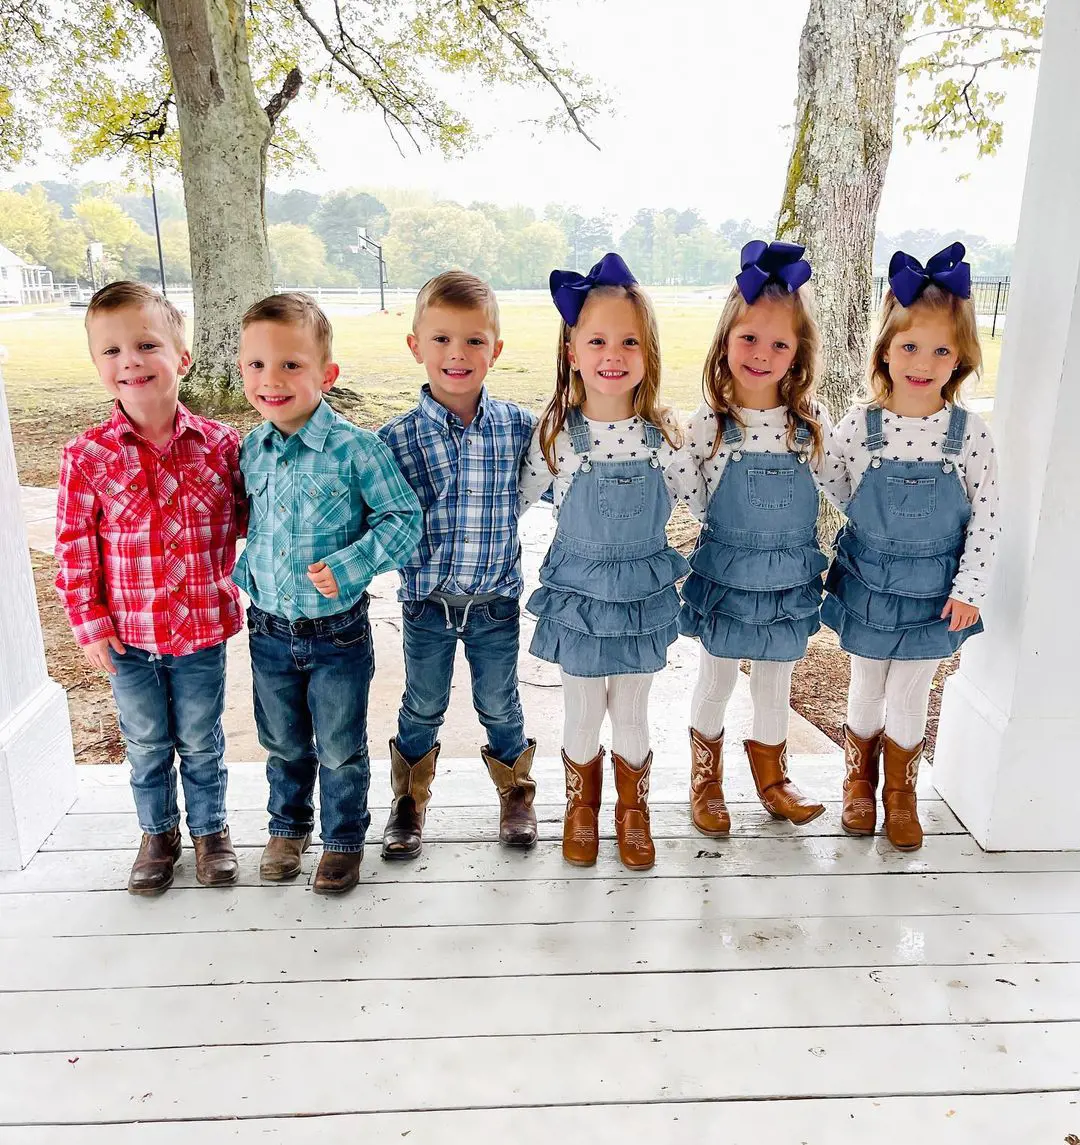 The kids from Sweet Home Sextuplets dressed as farmer for Farm Day at their school